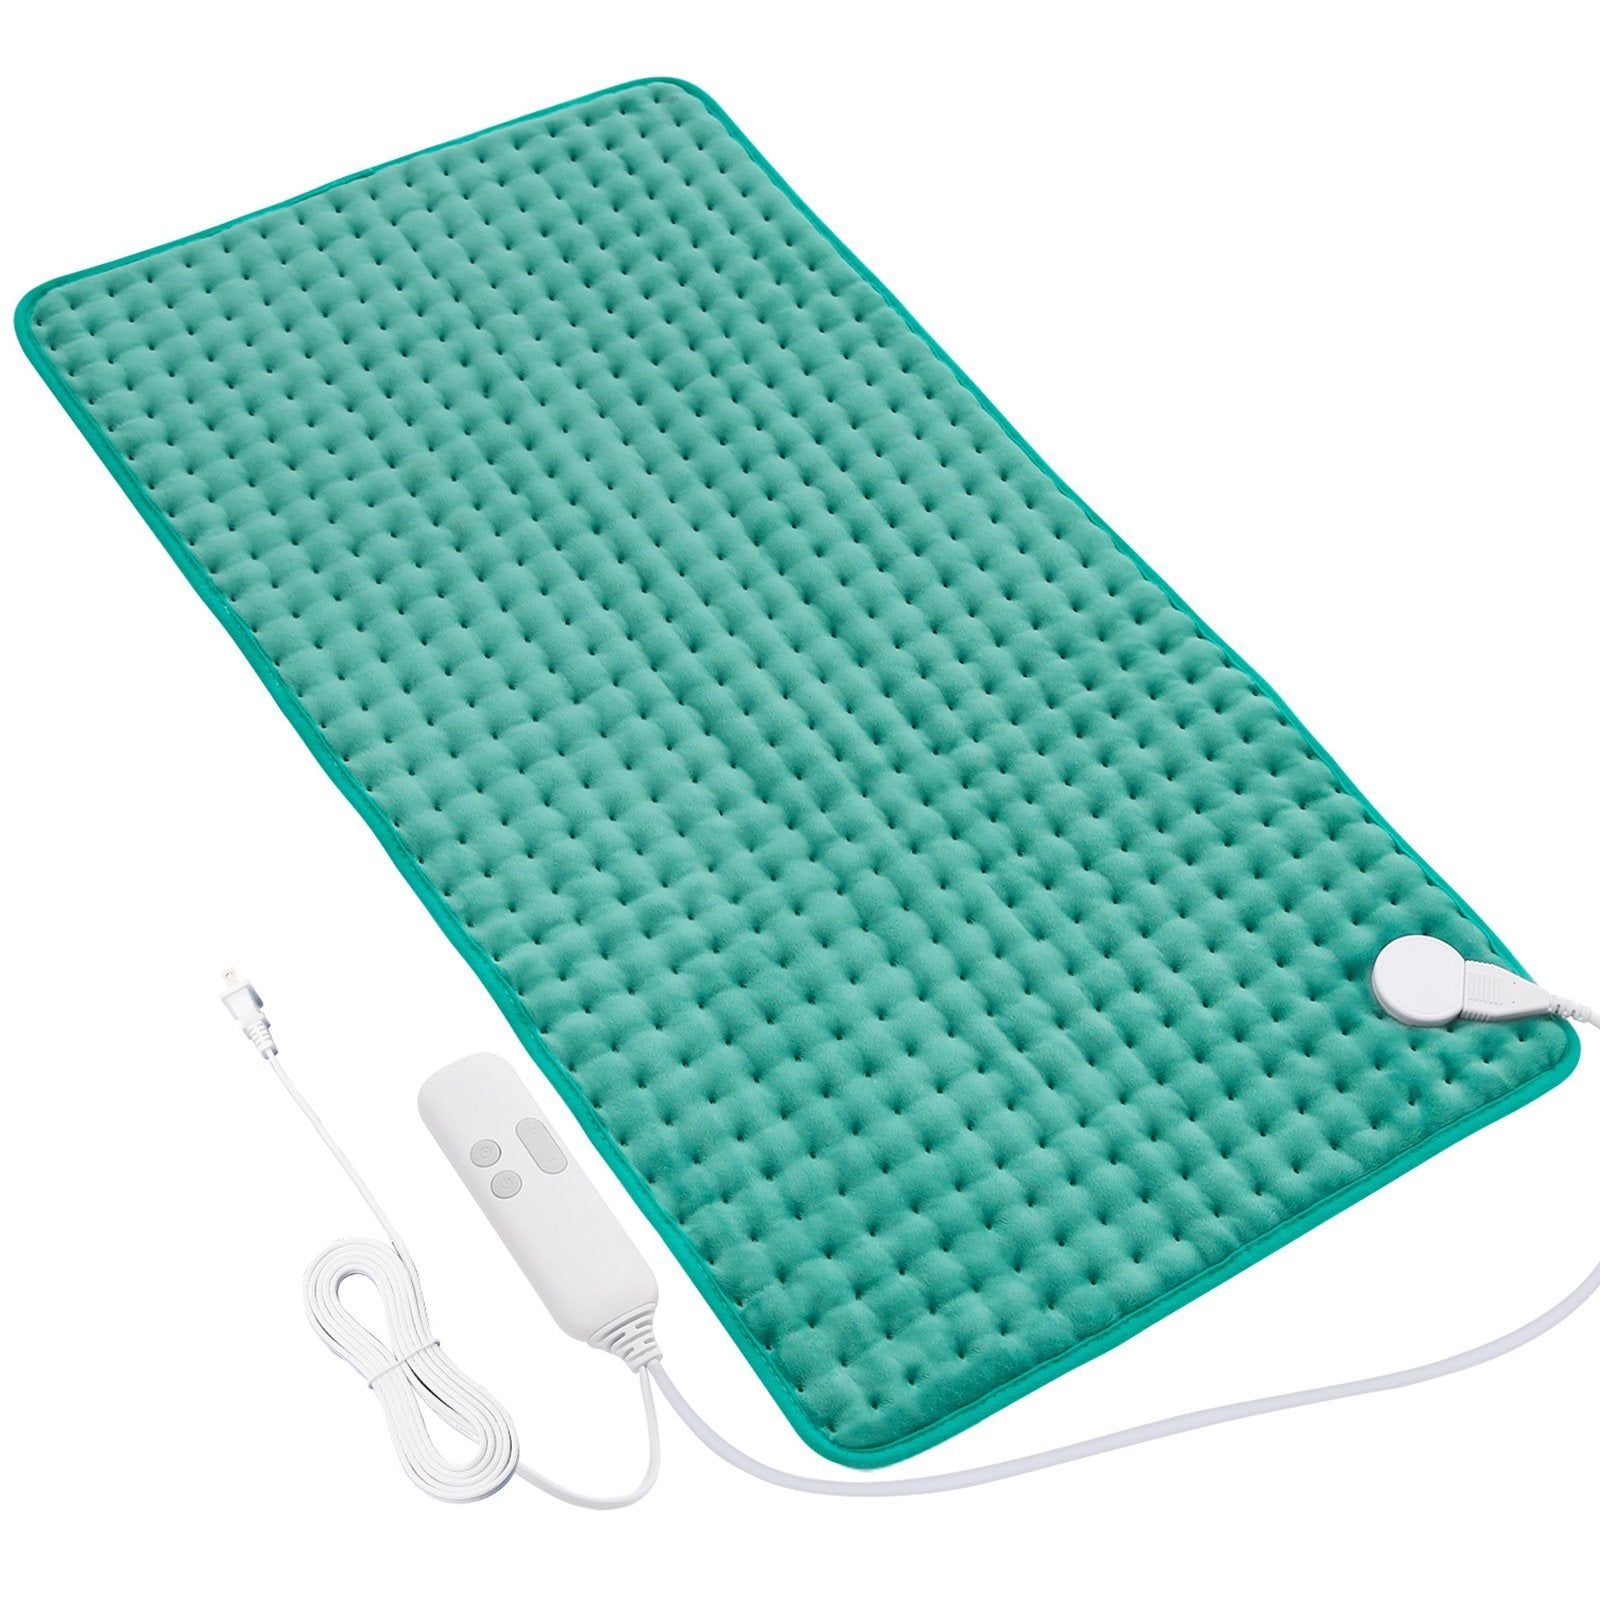 Heating Pad for Back Pain Relief, Large Heat Pads for Cramps, Neck